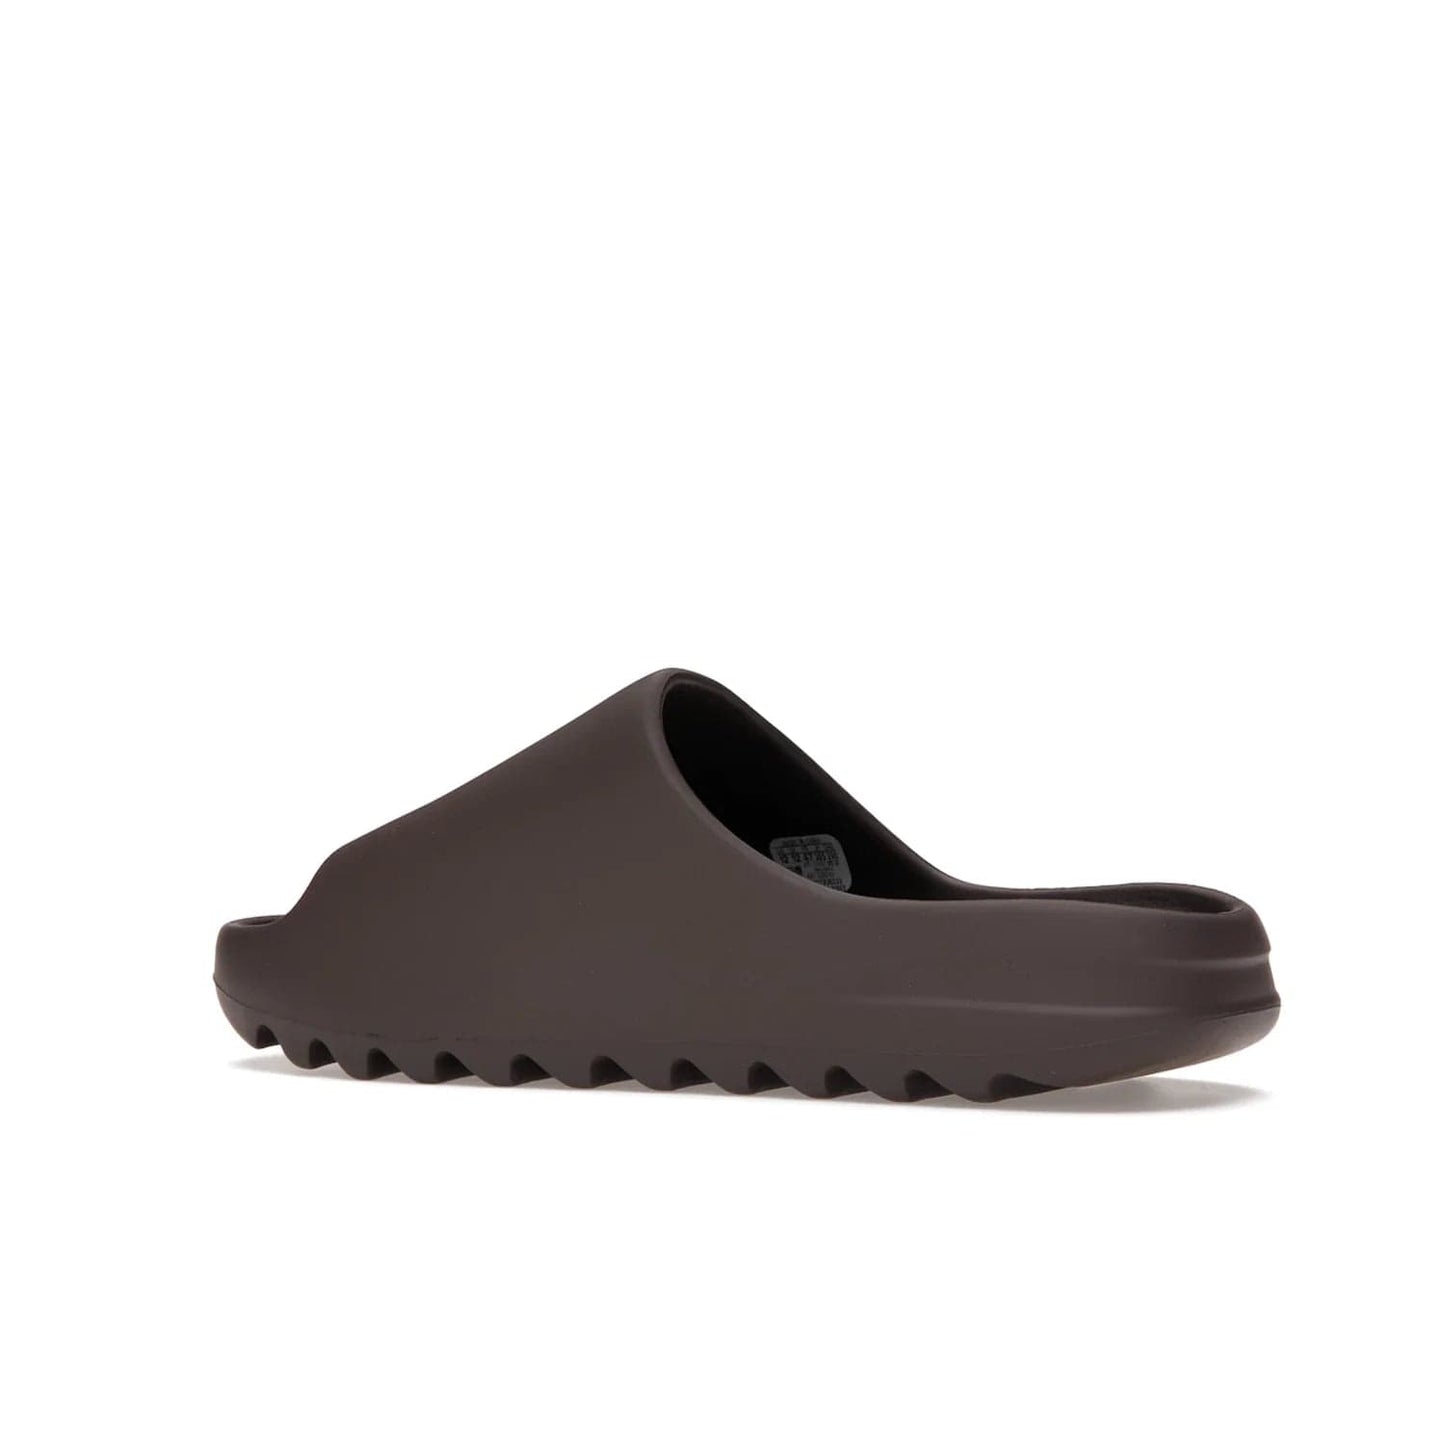 adidas Yeezy Slide Soot - Image 22 - Only at www.BallersClubKickz.com - Shop the Yeezy Slide Soot sneaker by Adidas, a sleek blend of form and function. Monochrome silhouette in Soot/Soot/Soot. Lightweight EVA foam offers comfort and durability. Get the must-have style today.